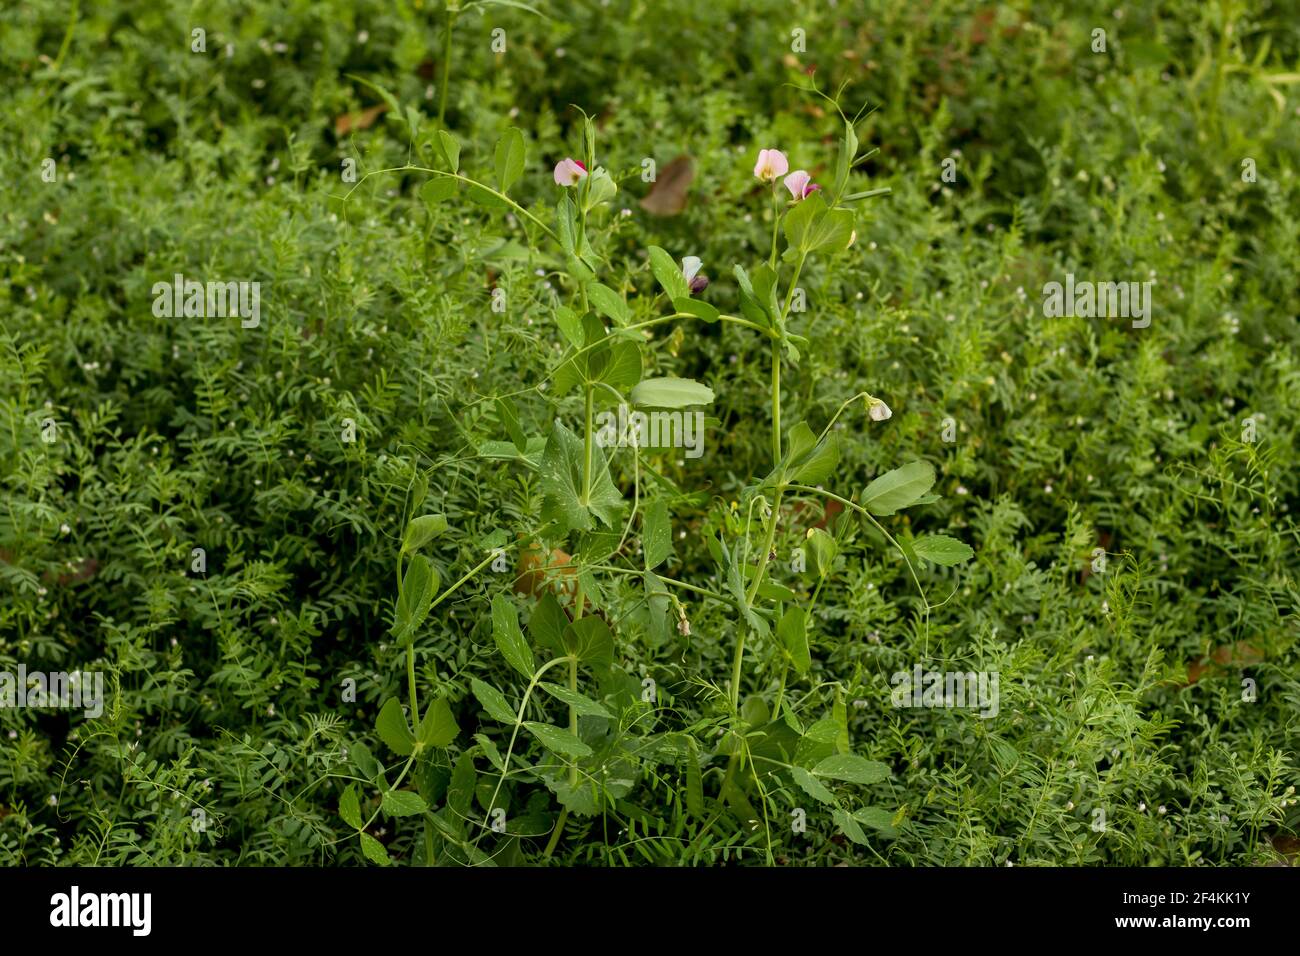 The lentil and pea is edible food and vegetables it's an annual plant known for its lens-shaped seed's soft pink and green color Stock Photo